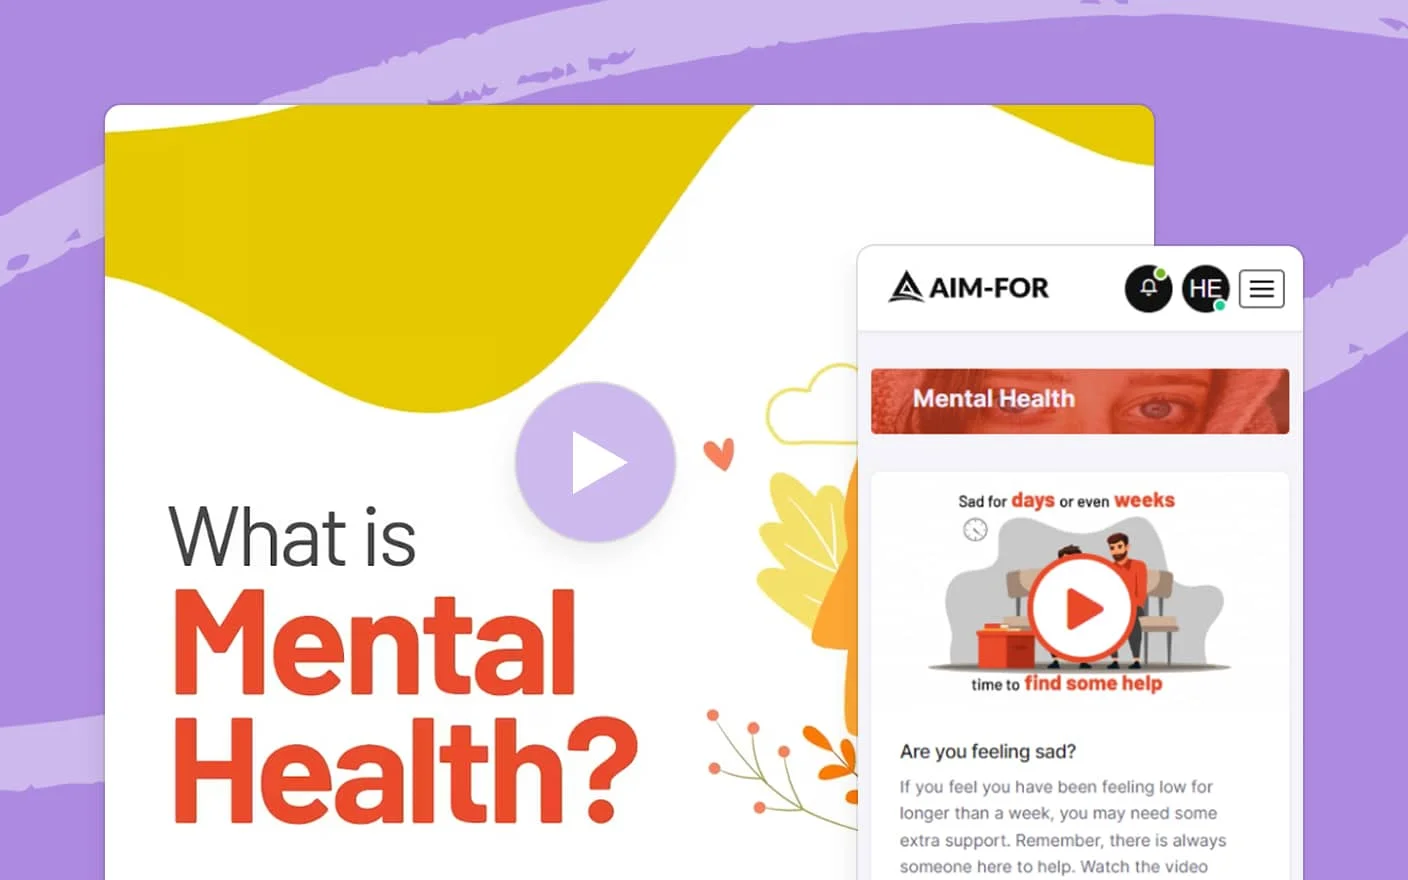 Screenshot of a mental health video resource page from The Safety Net, featuring a play button overlay on a colorful, informative banner reading 'What is Mental Health?' and another video thumbnail highlighting the message 'Sad for days or even weeks? Time to find some help.' Below is text encouraging users feeling sad for more than a week to watch the video for support, emphasising the breadth of The Safety Net's video resources on mental health and wellbeing.